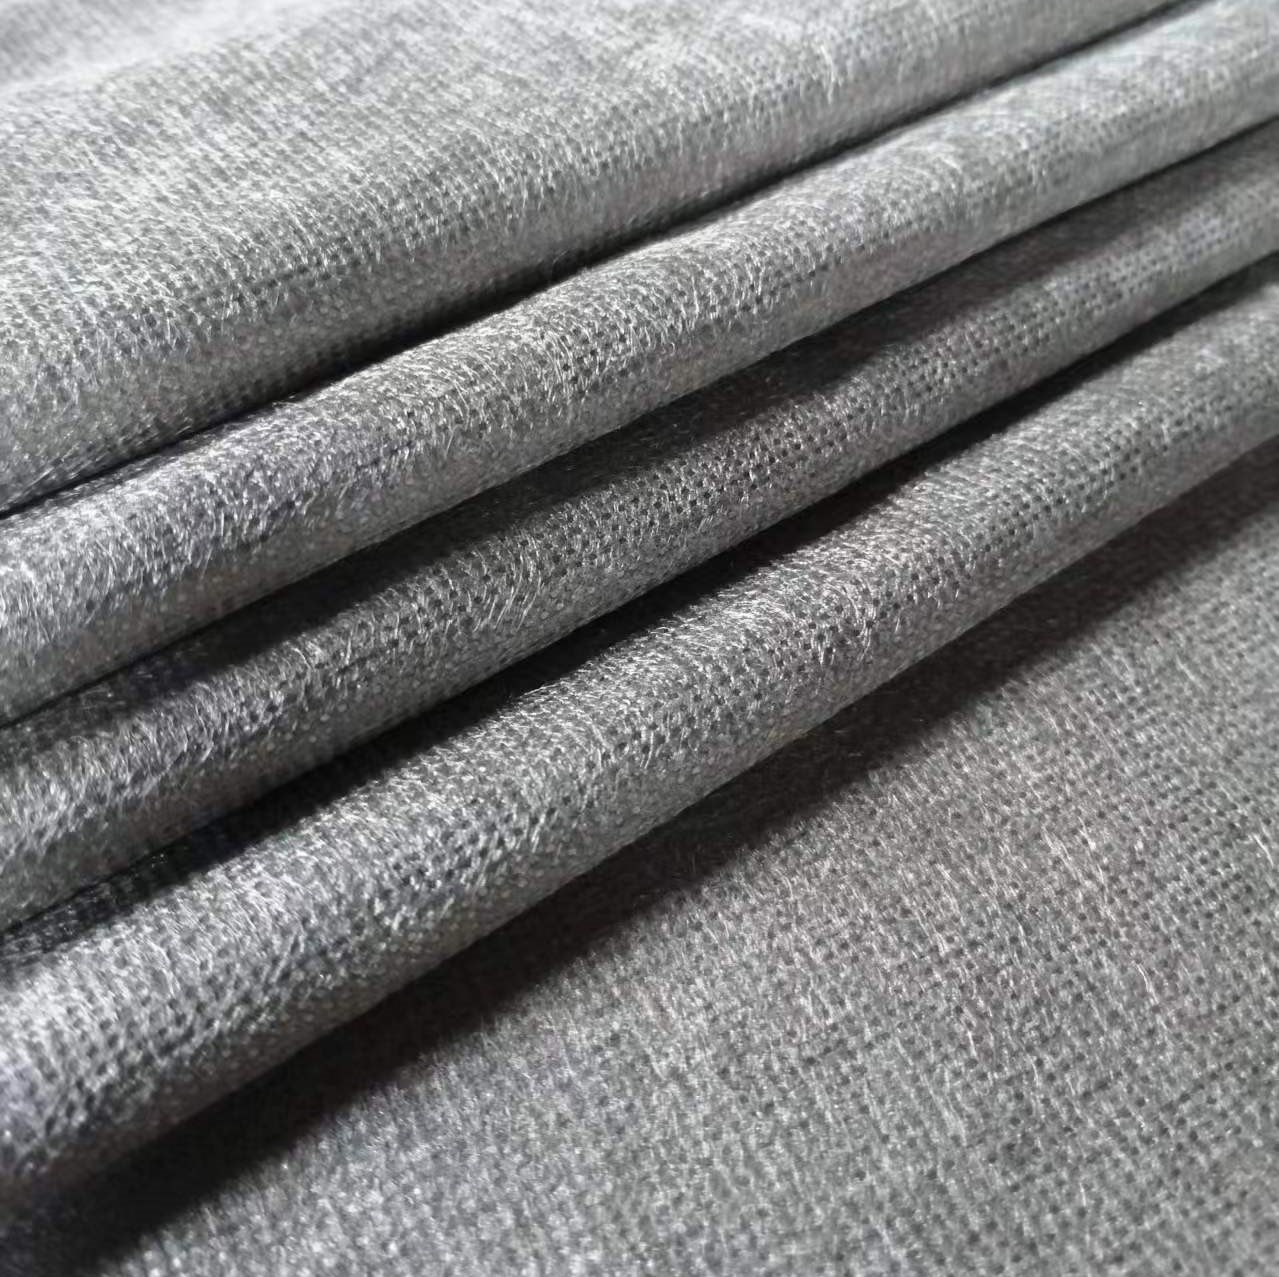 Silver-plated conductive antibacterial non-woven fabric